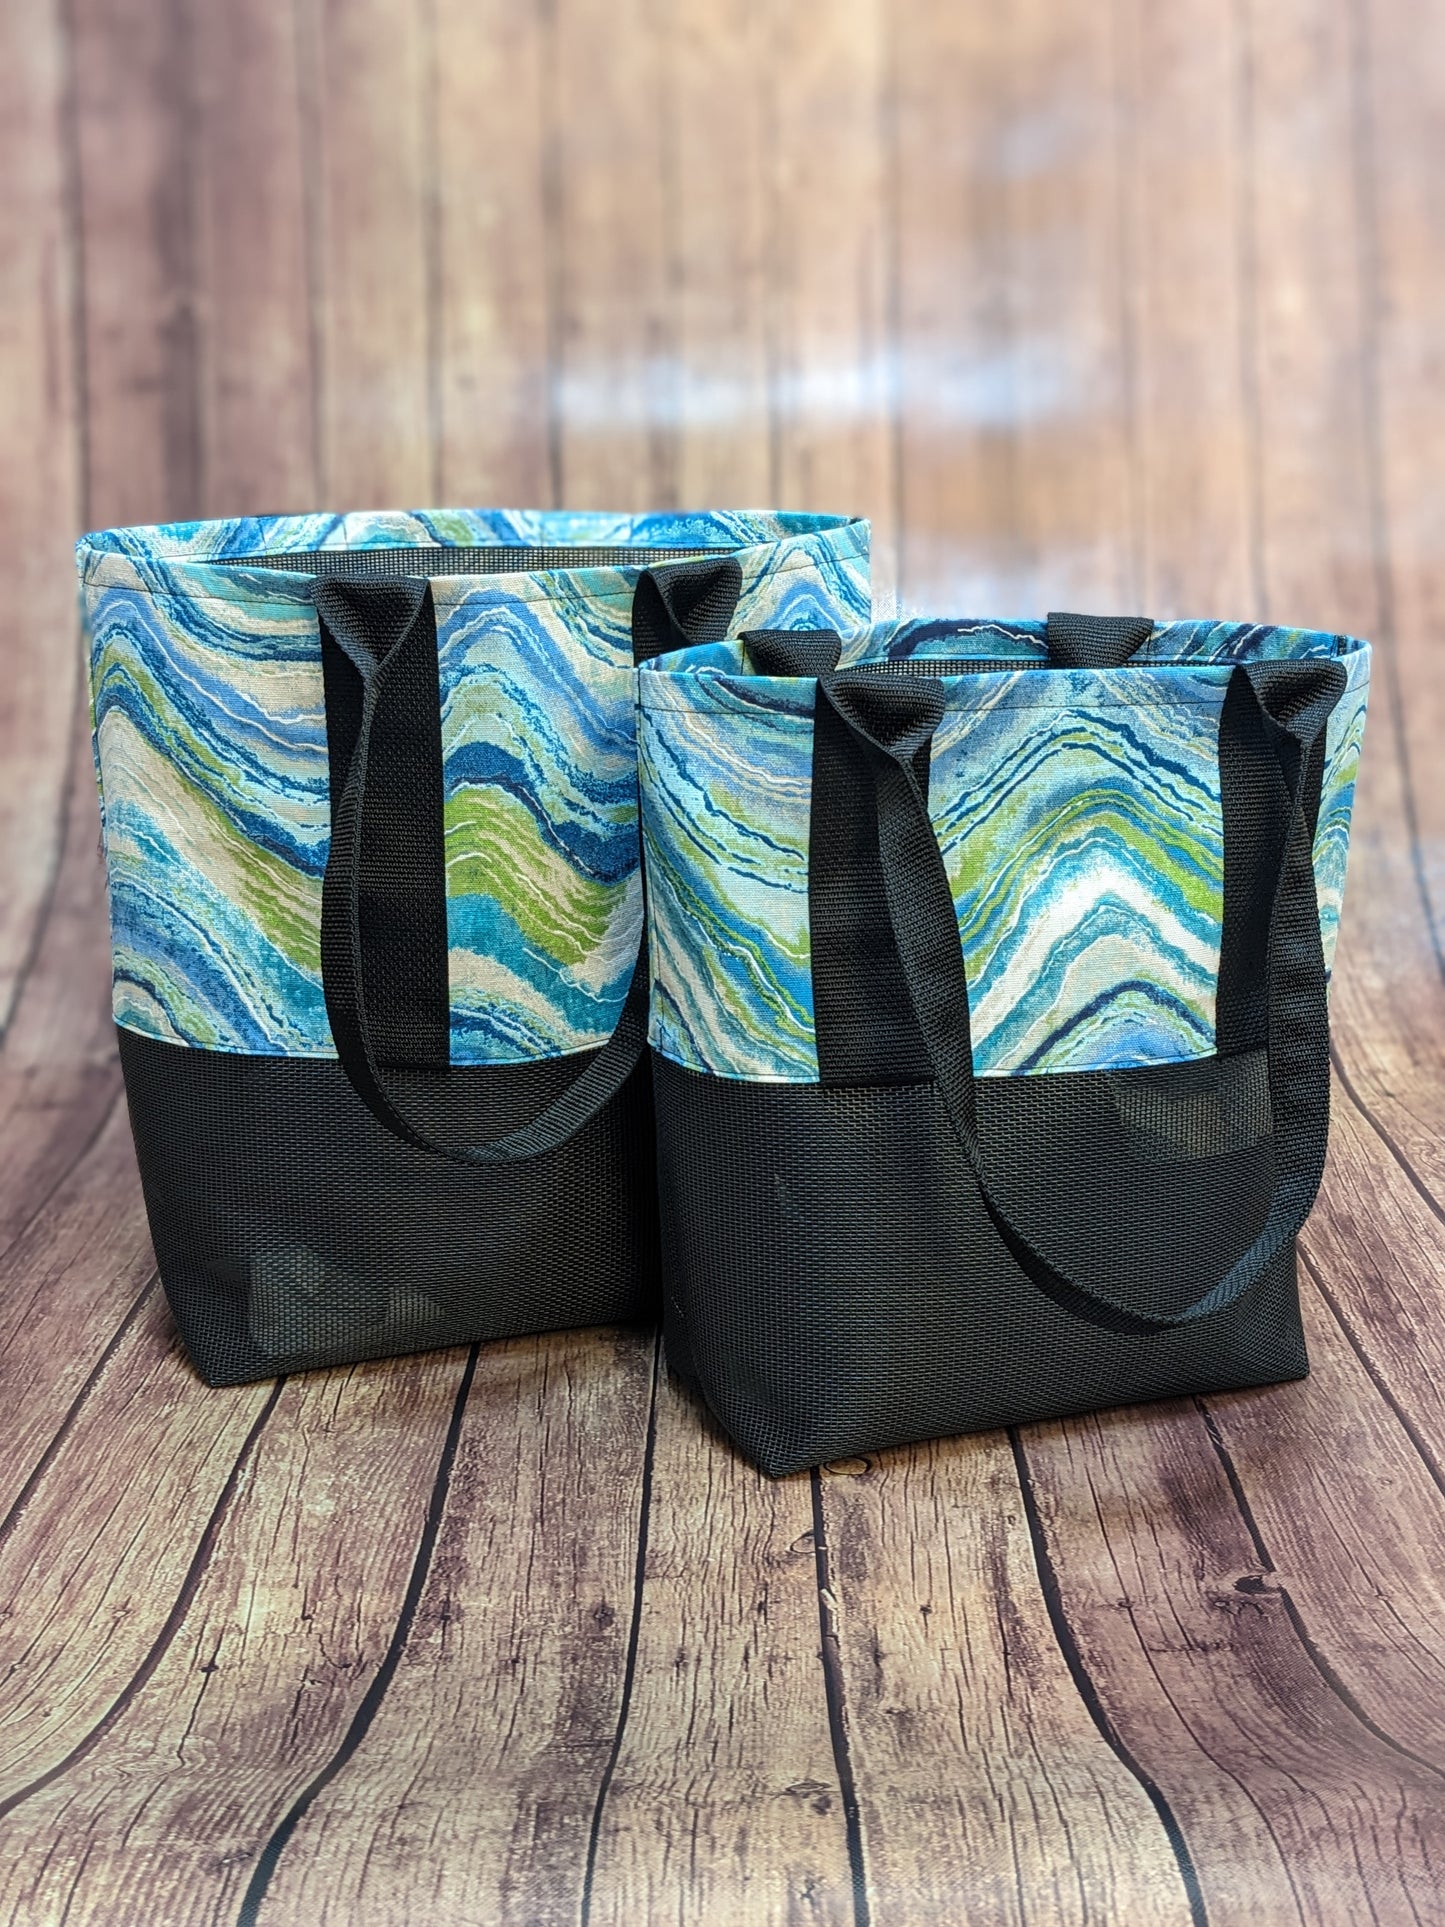 Jo Jo Ultimate Carry-All Tote Set [Waves]: Versatile Practicality for Every Occasion